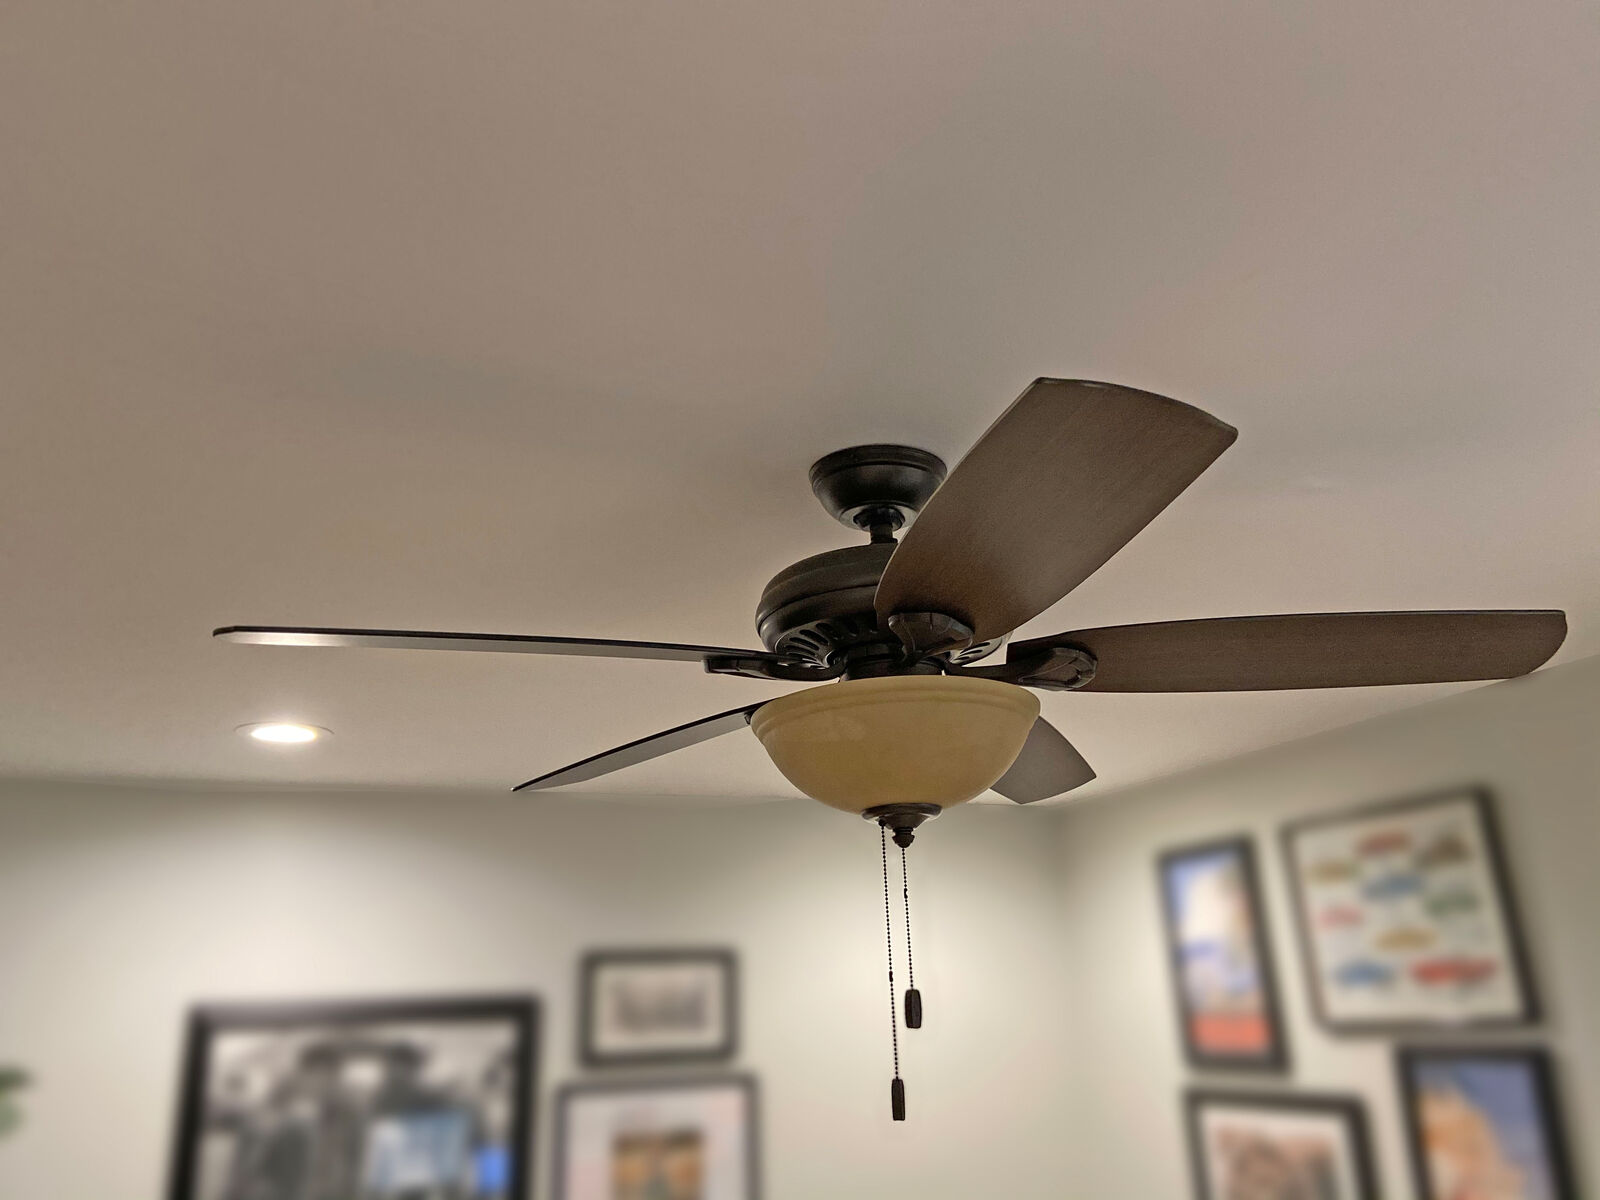 looping video of a spinning ceiling fan